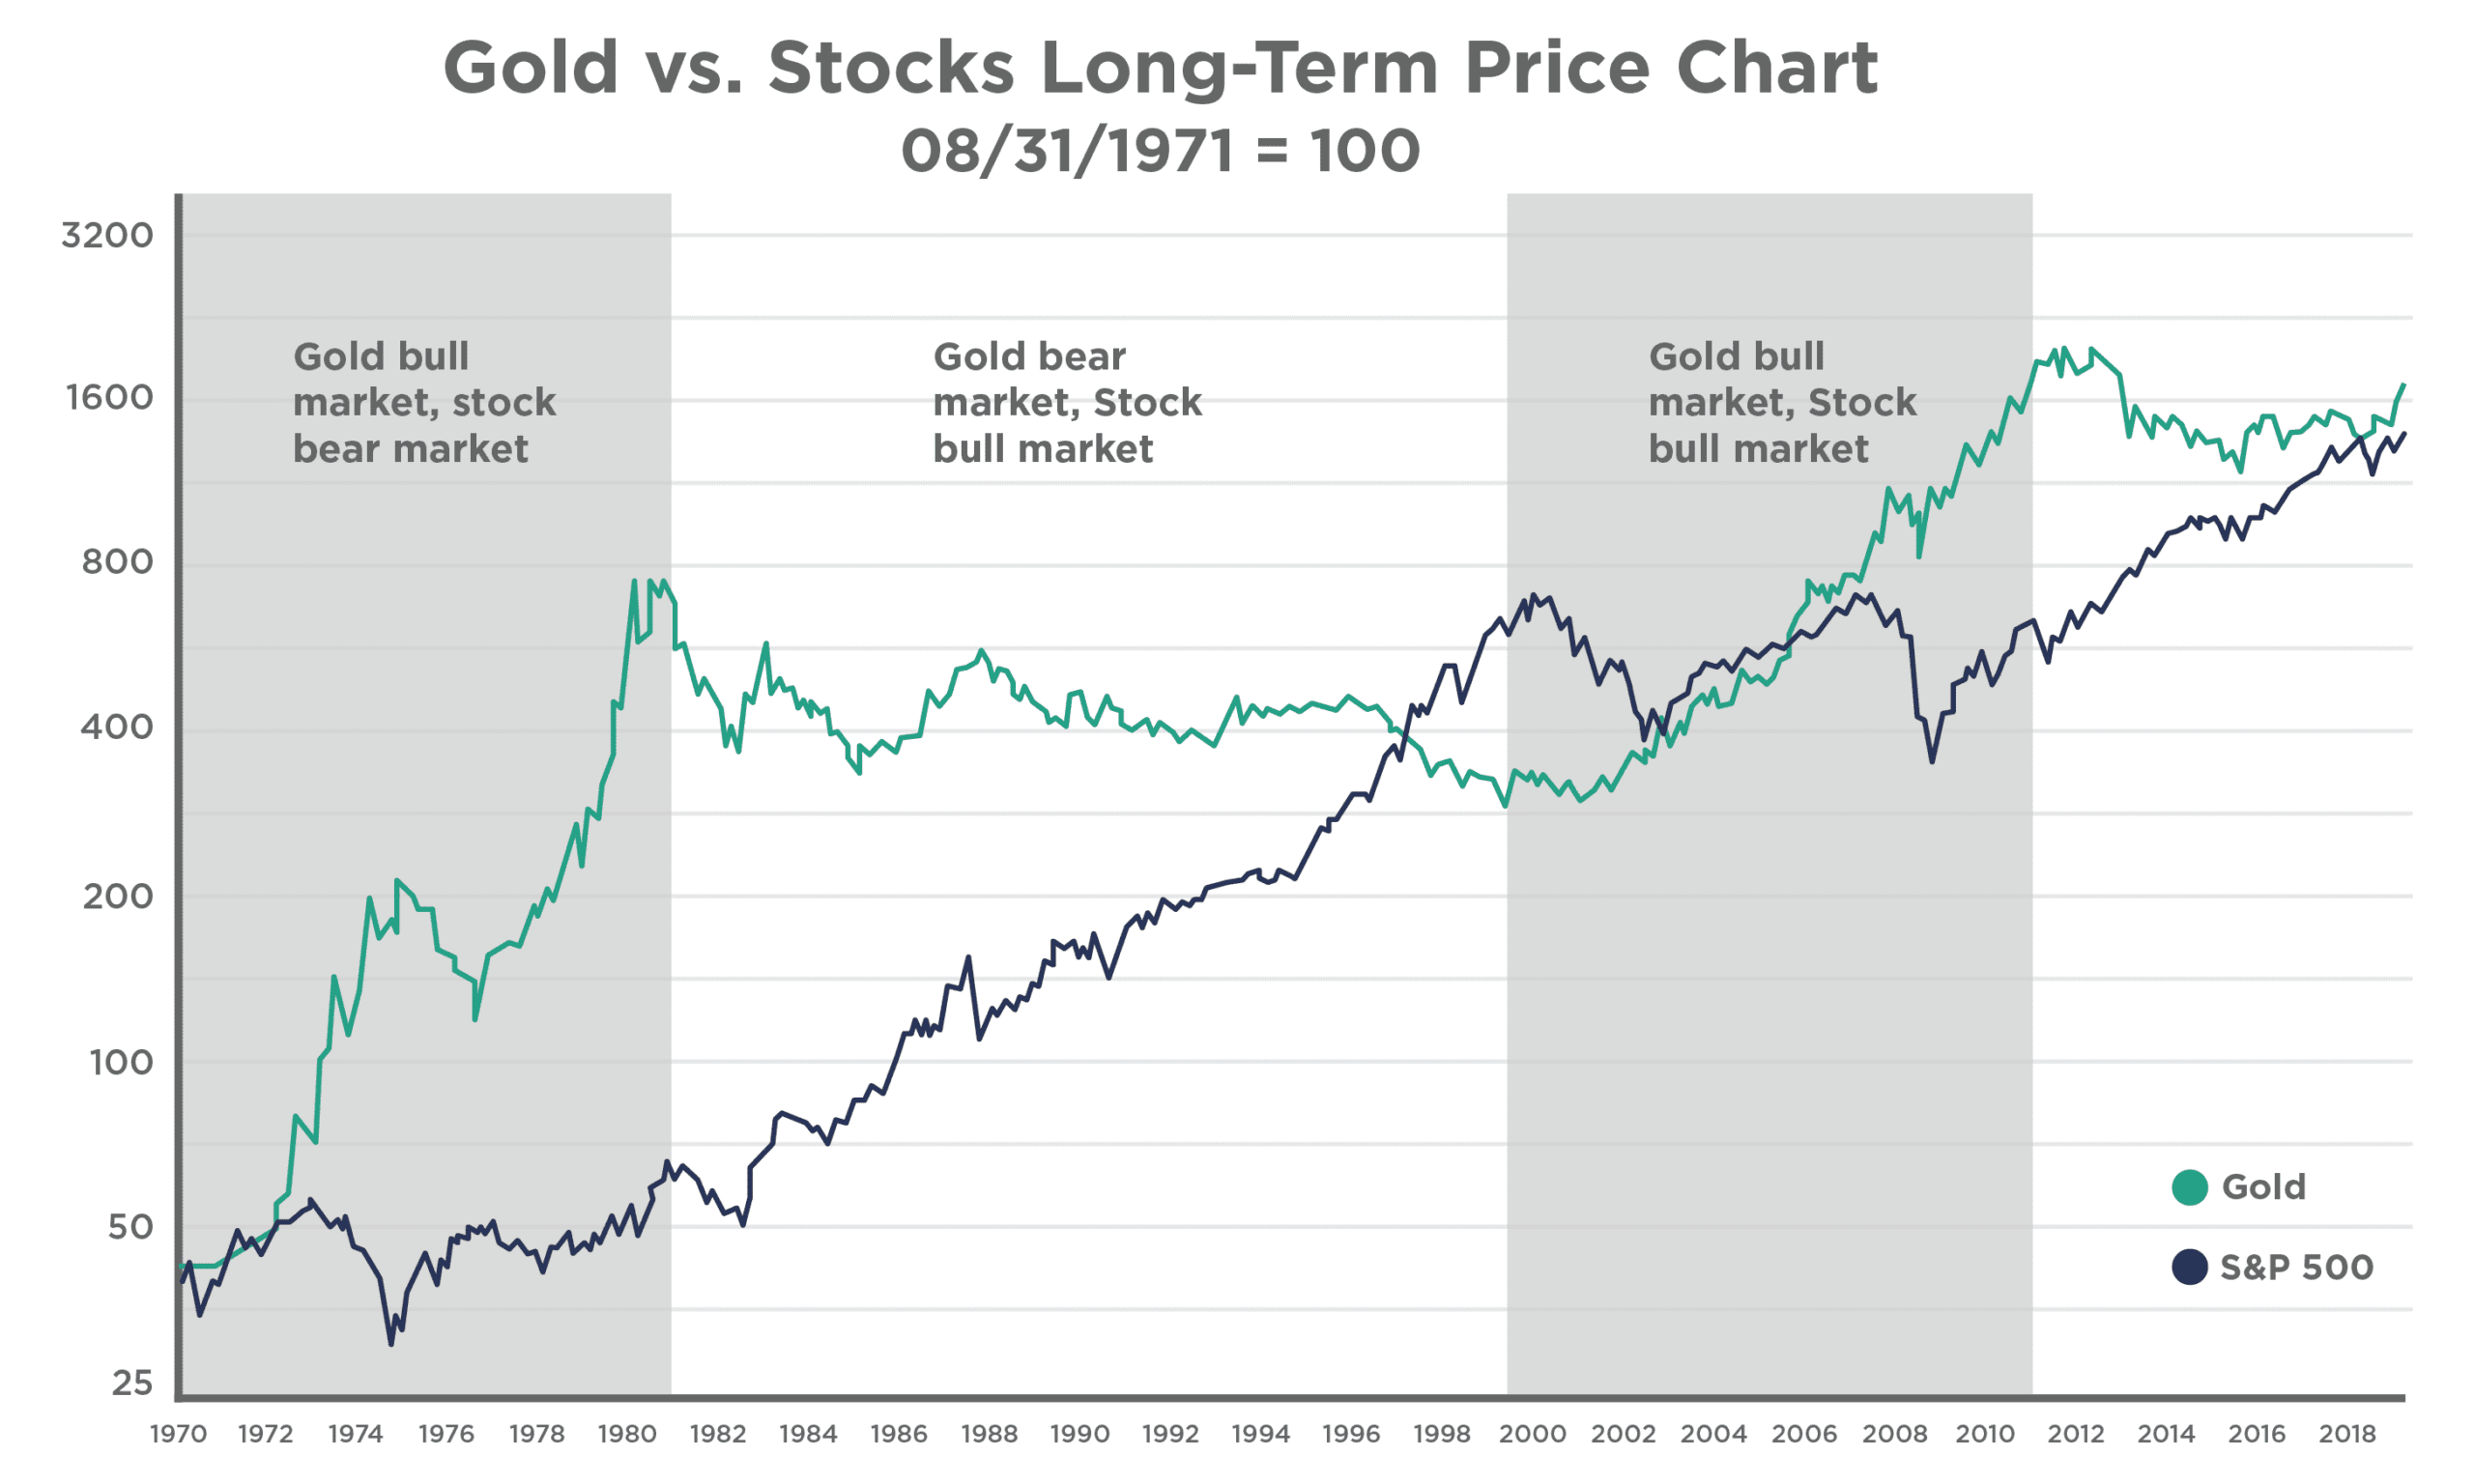 This chart shows the inverse relationship between Gold and the S&P 500